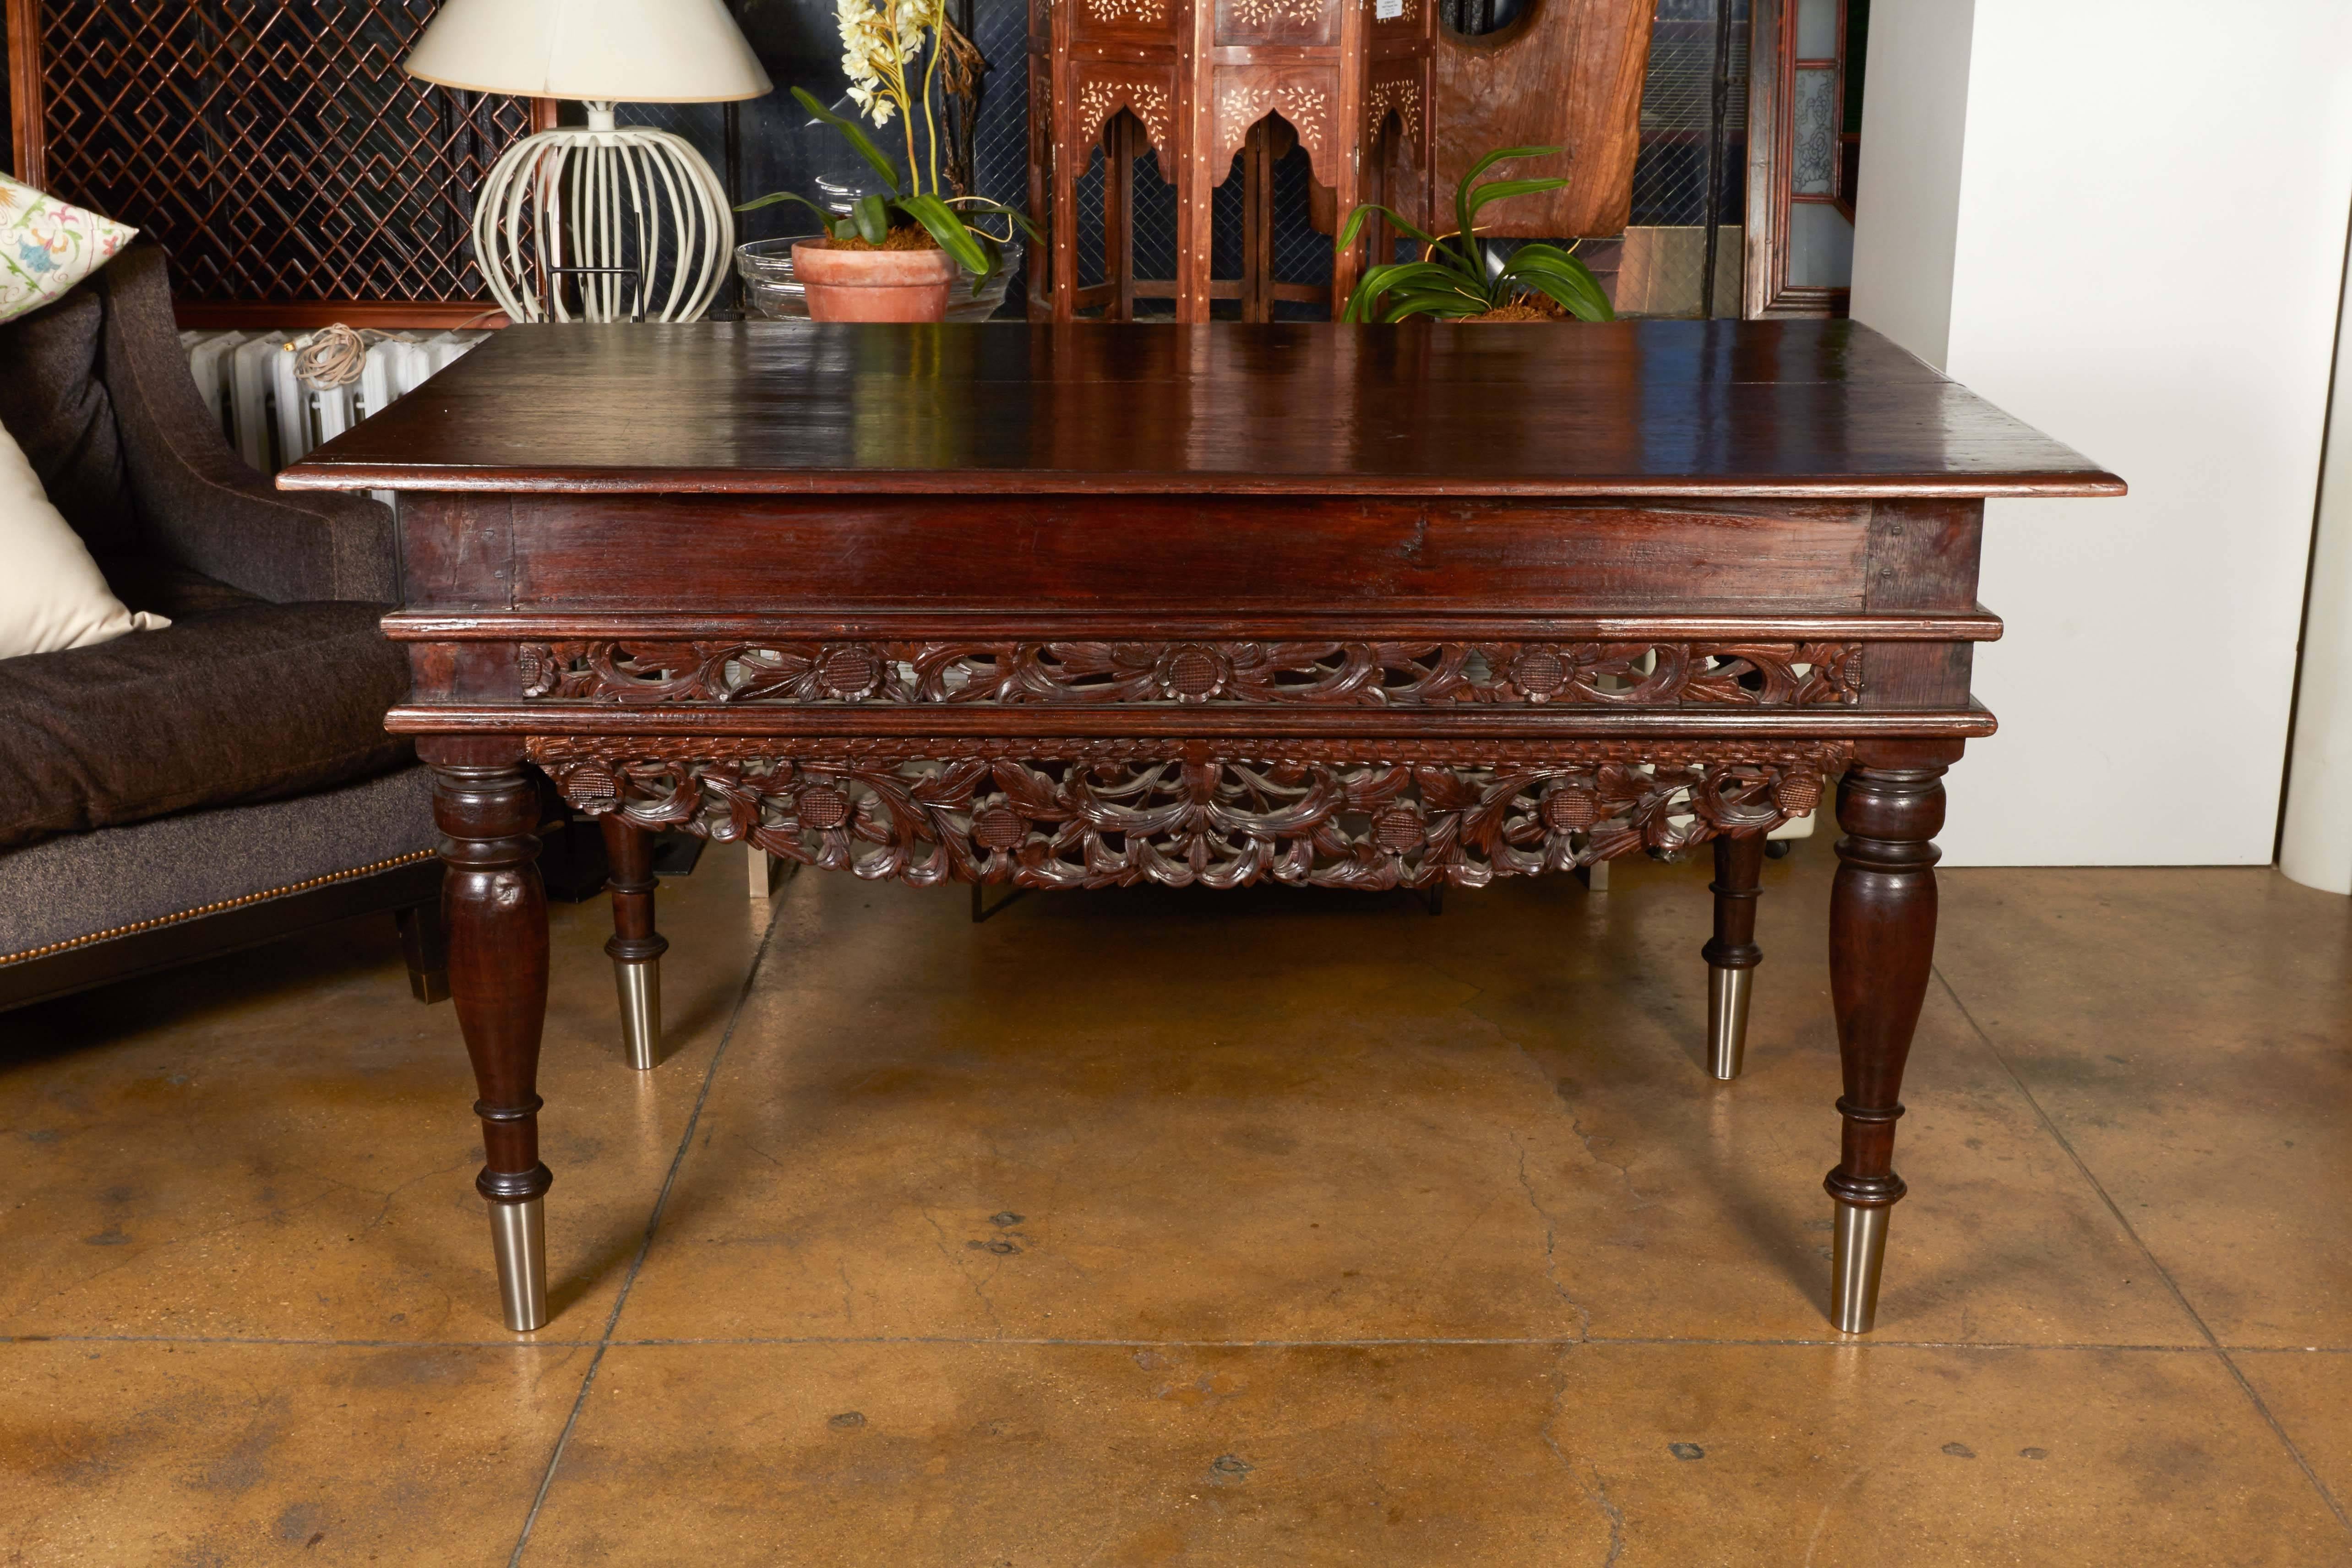 A desk or table from Madura, an island in Indonesia, with an ornate floral carving on its front and apron, scrolled legs with stainless feet, and one small drawer.